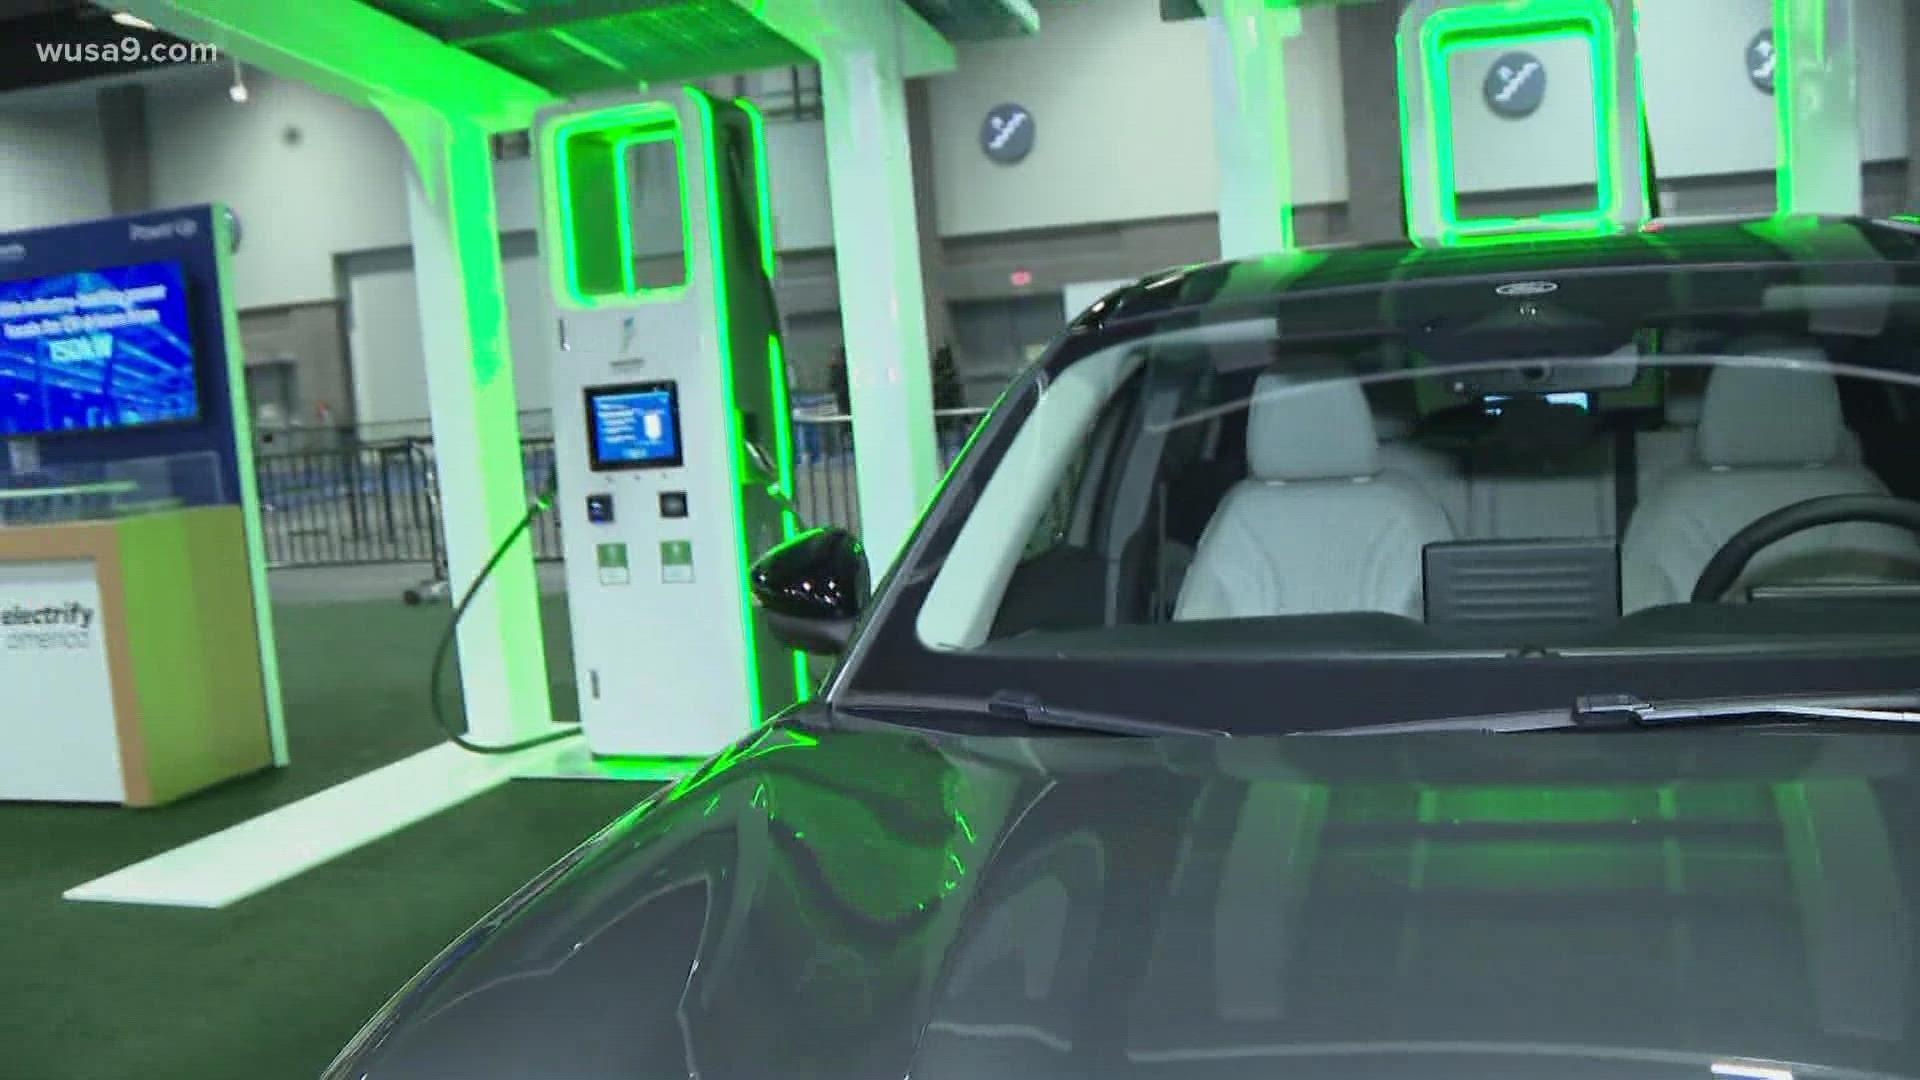 DC Auto Show features electric, hybrid cars